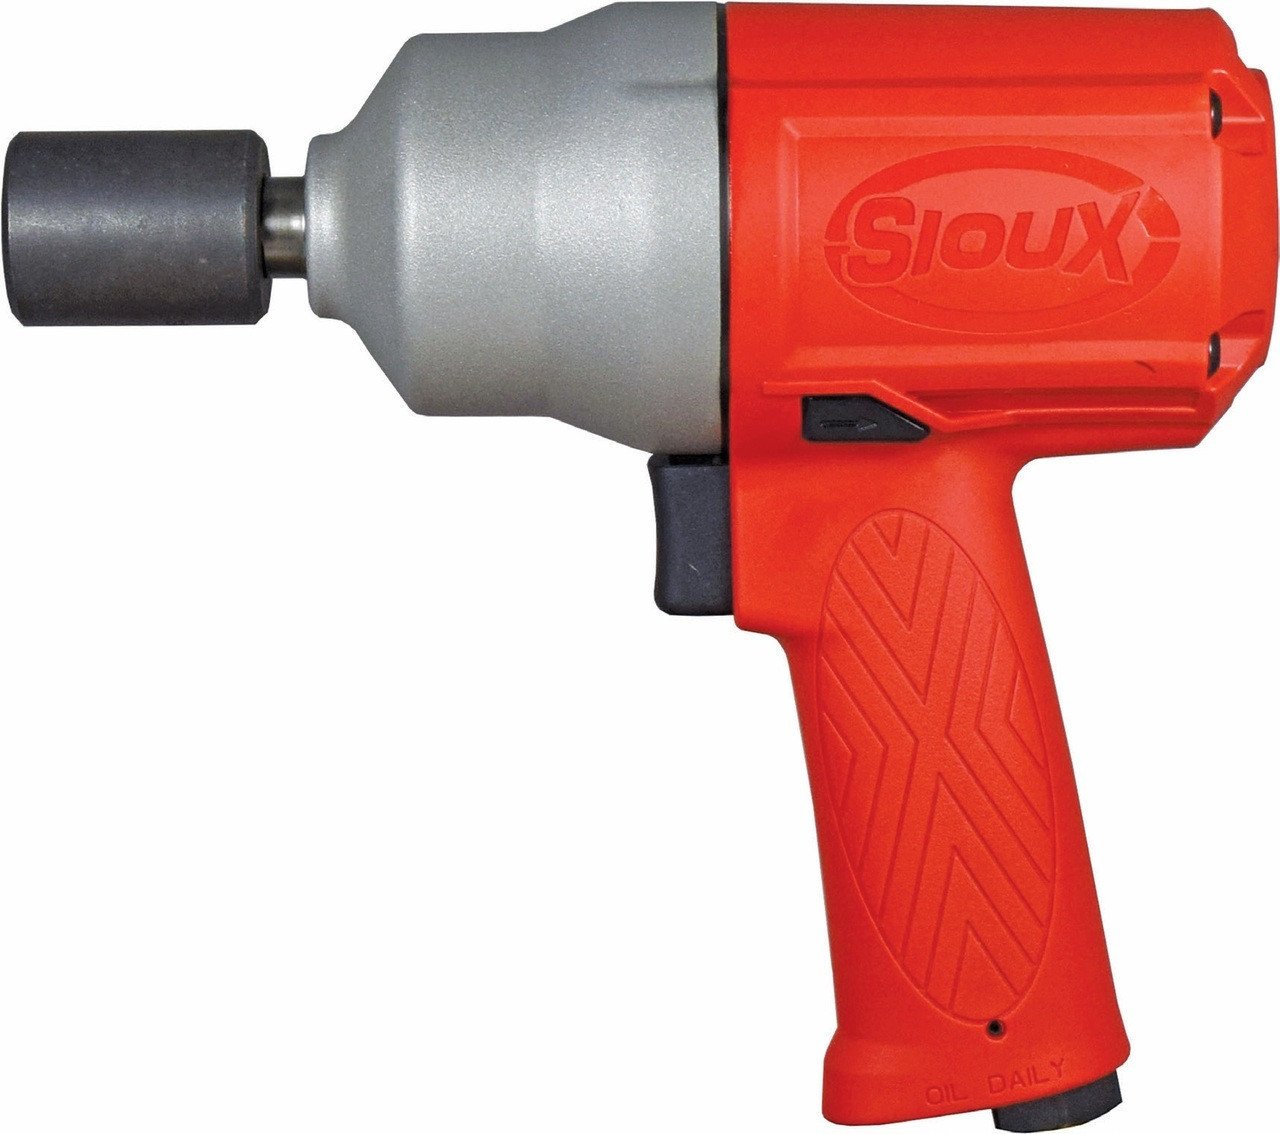 Sioux Tools IW500MP-4P3 Impact Wrench | 1/2" Drive | 9400 RPM | 780 ft.-lb. Max Torque